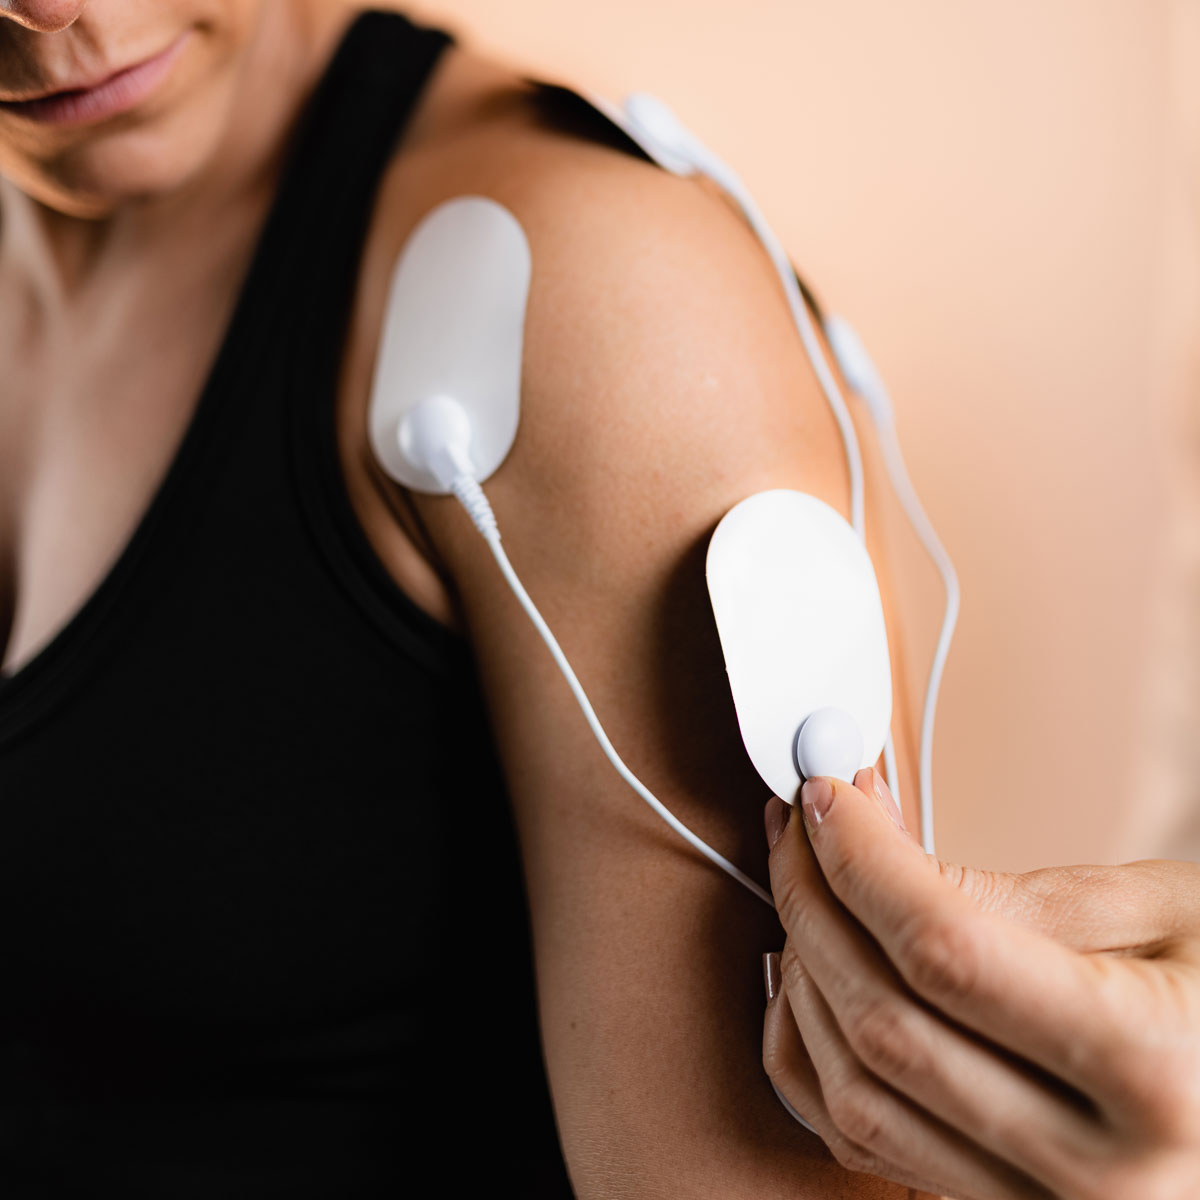 Electrical Muscle Stimulation & Chiropractors: What Is It? How